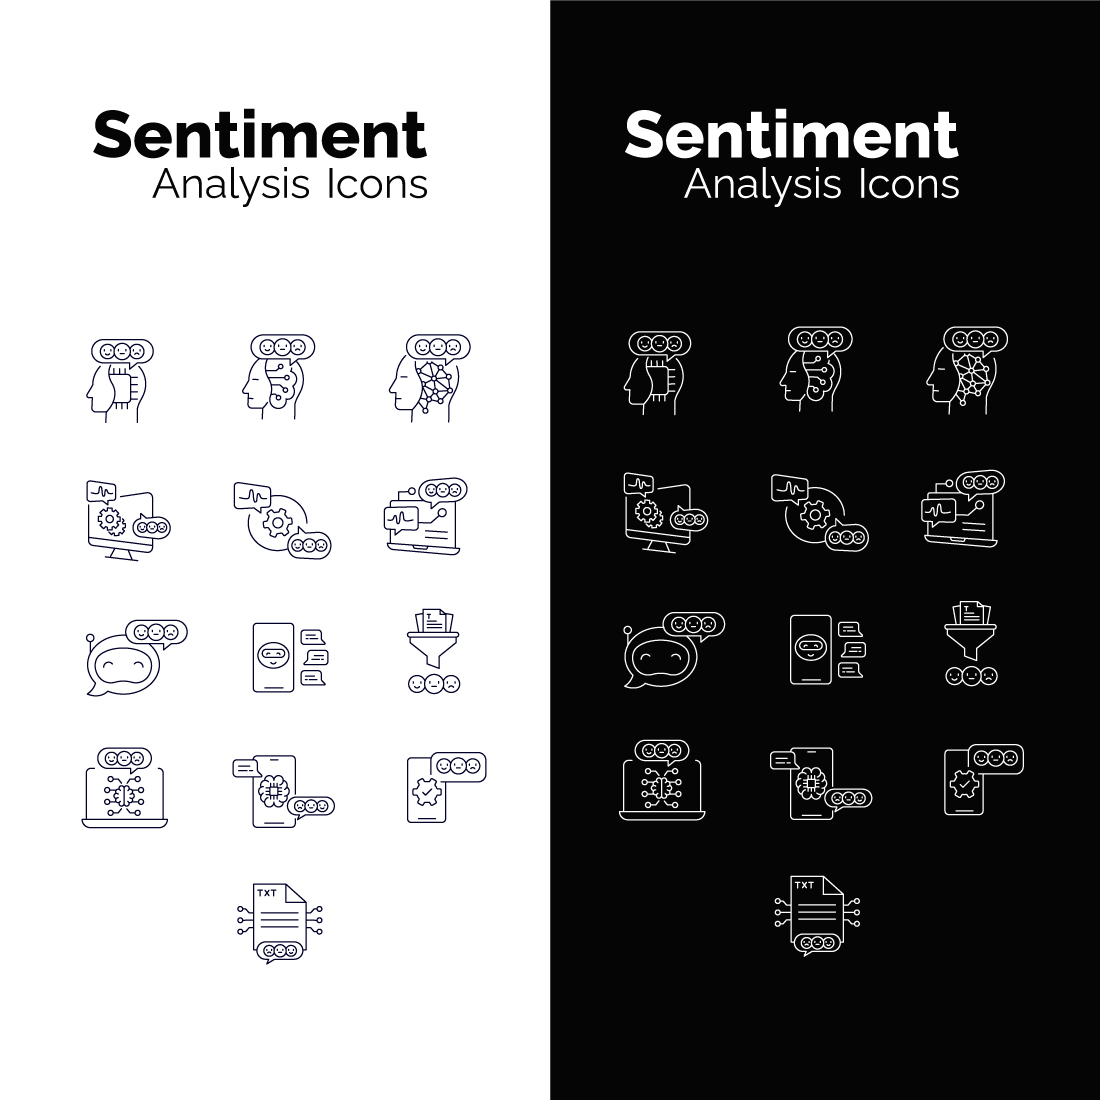 Sentiment Analysis Iconography: Vector Line Icons for Emotion Evaluation and Recognition Iconic Representation of Sentiment Analysis cover image.